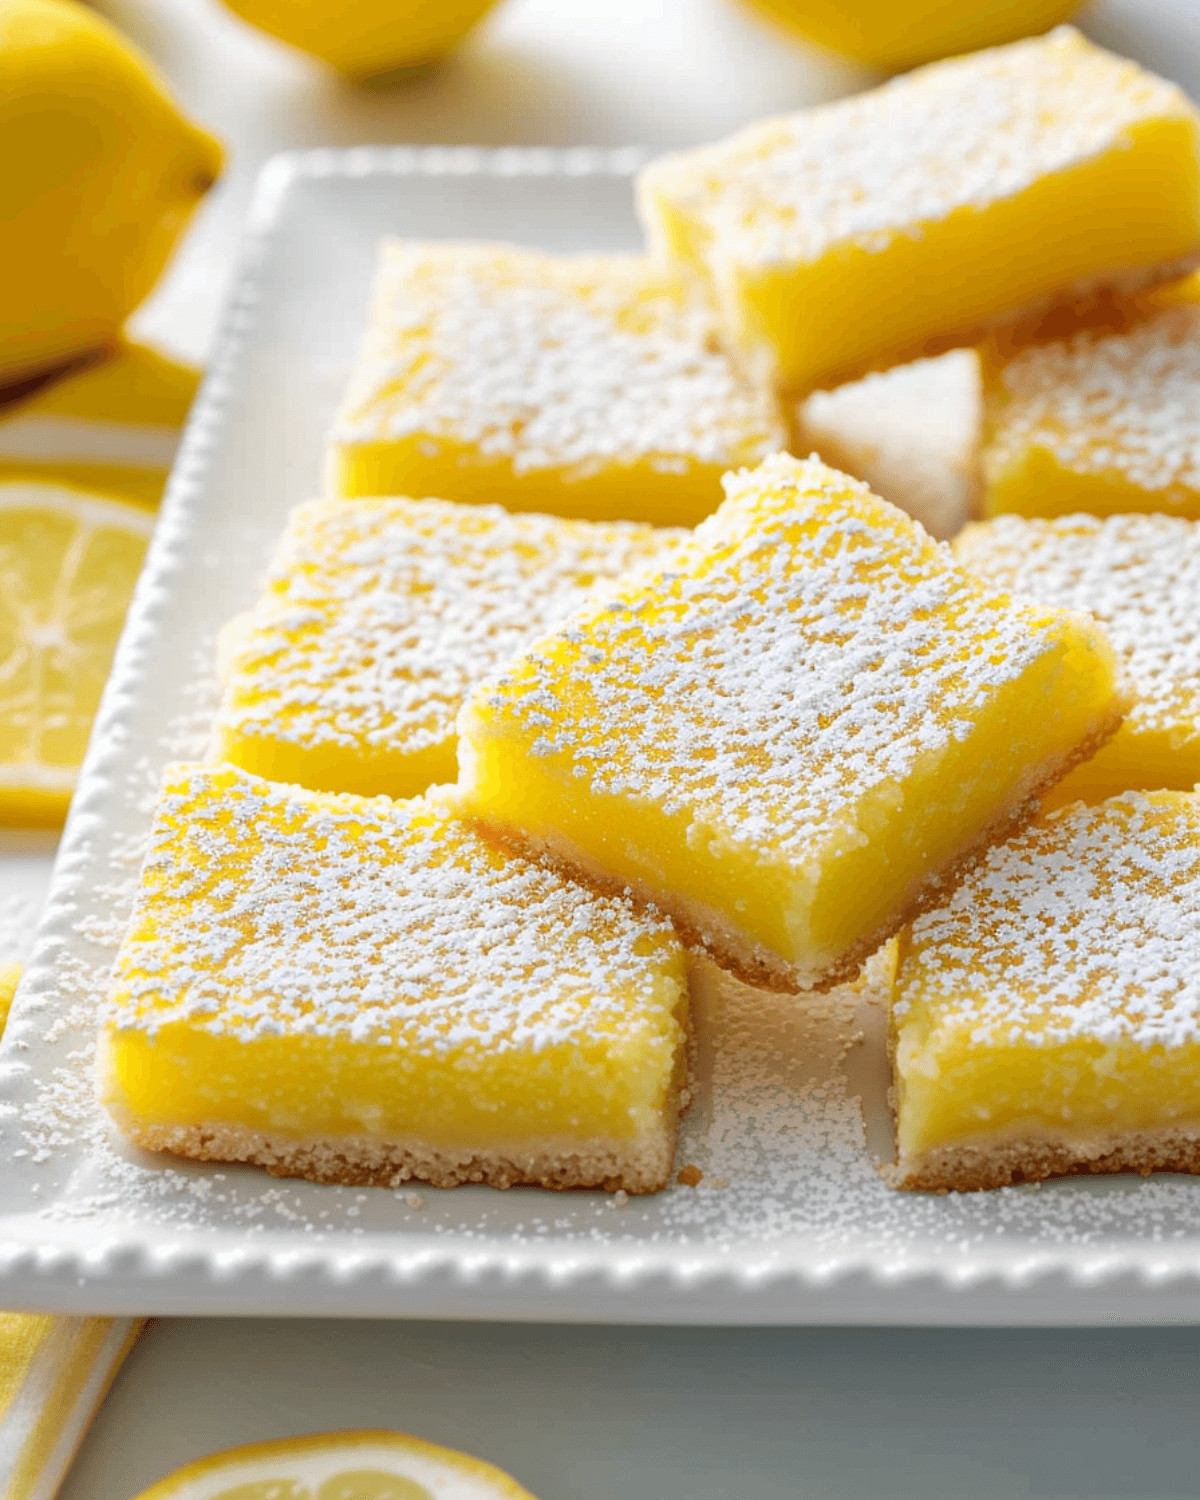 Delicious 2 Ingredient Lemon bars on a white plate.